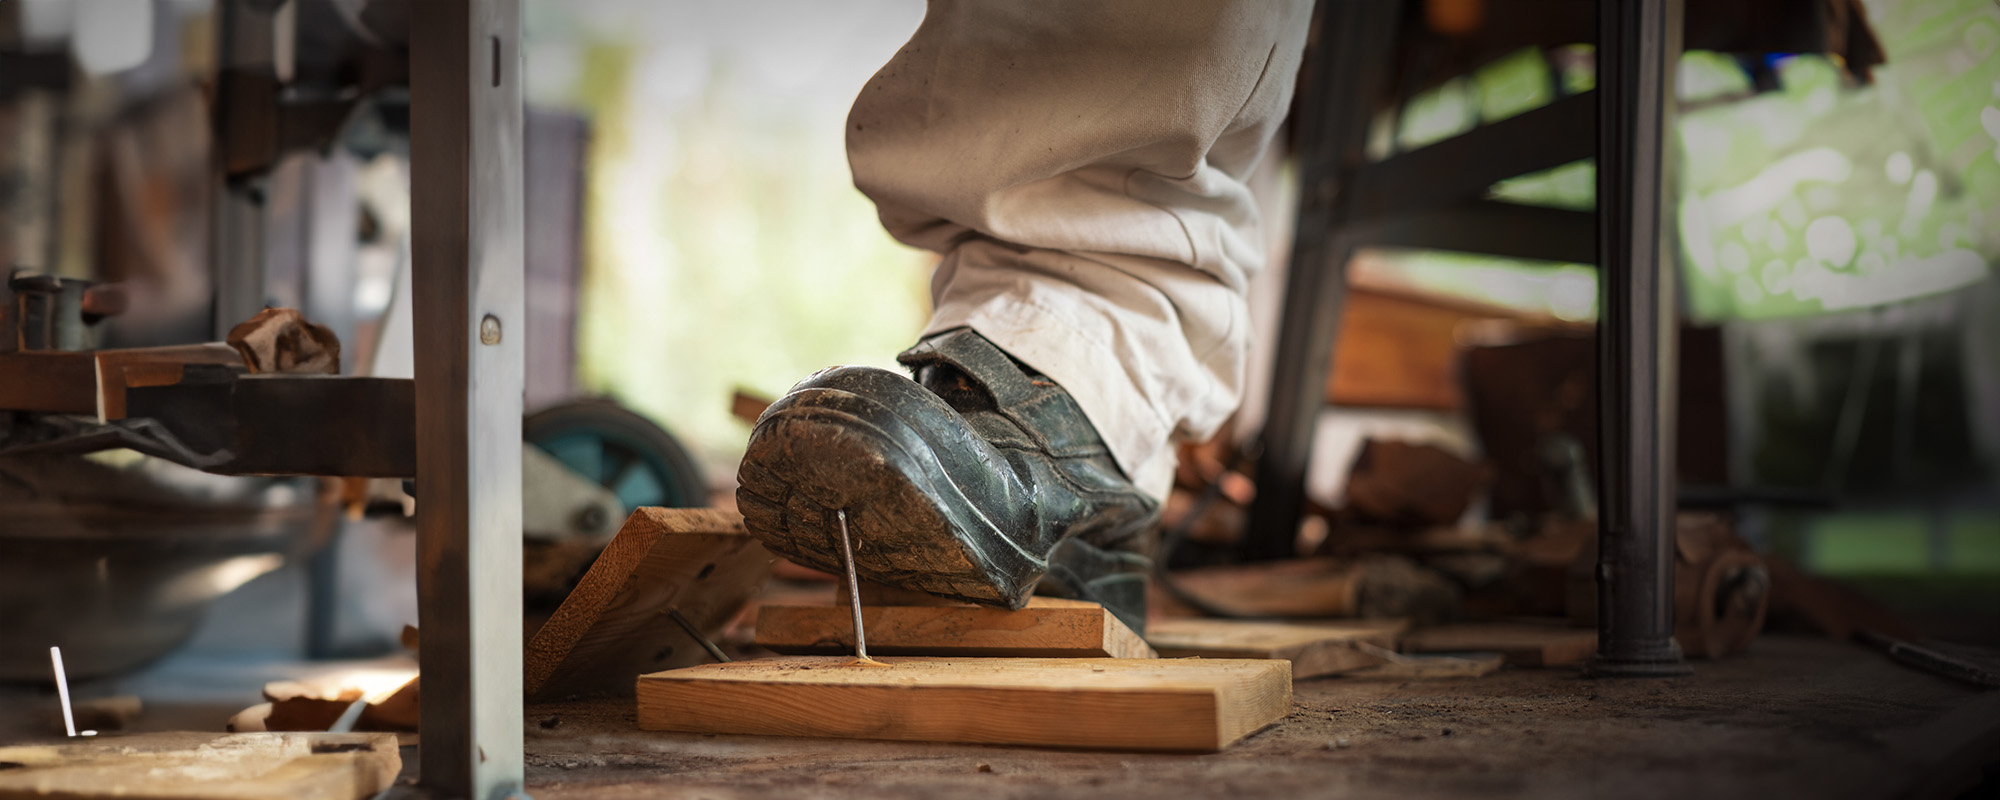 worker in safety shoes stepping on nails on board wood in the construction area copy